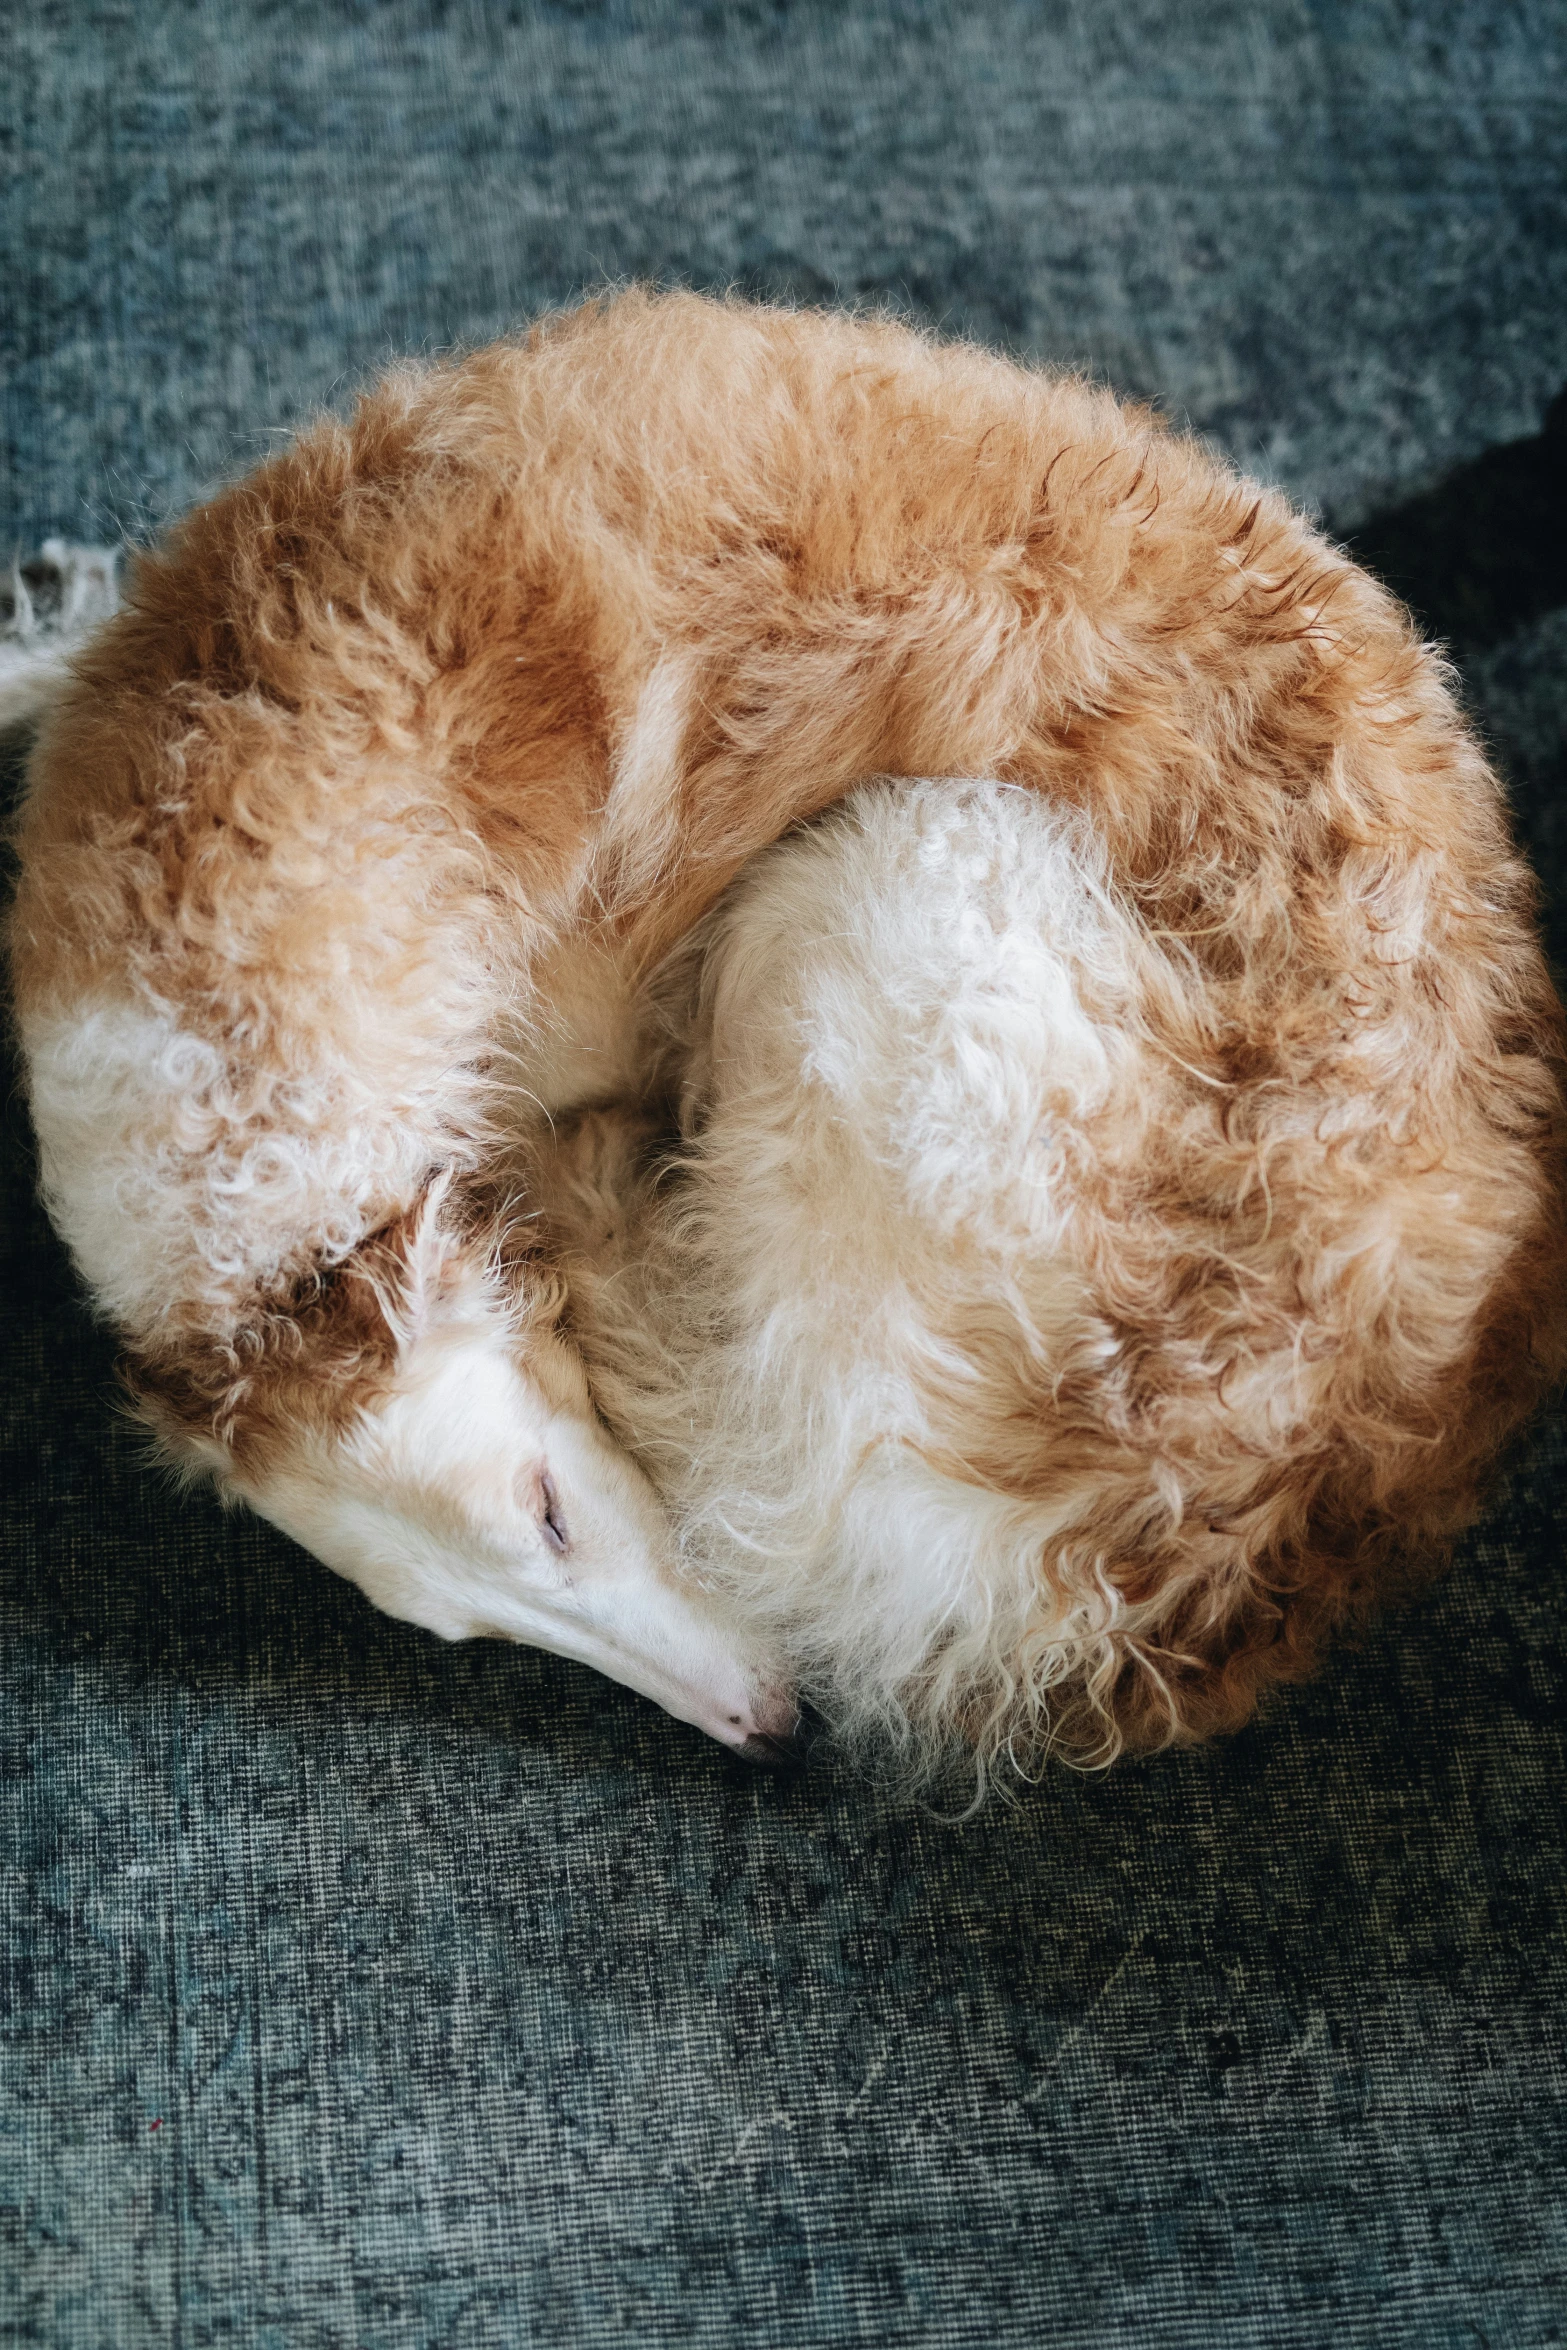 a dog curled up on the floor sleeping